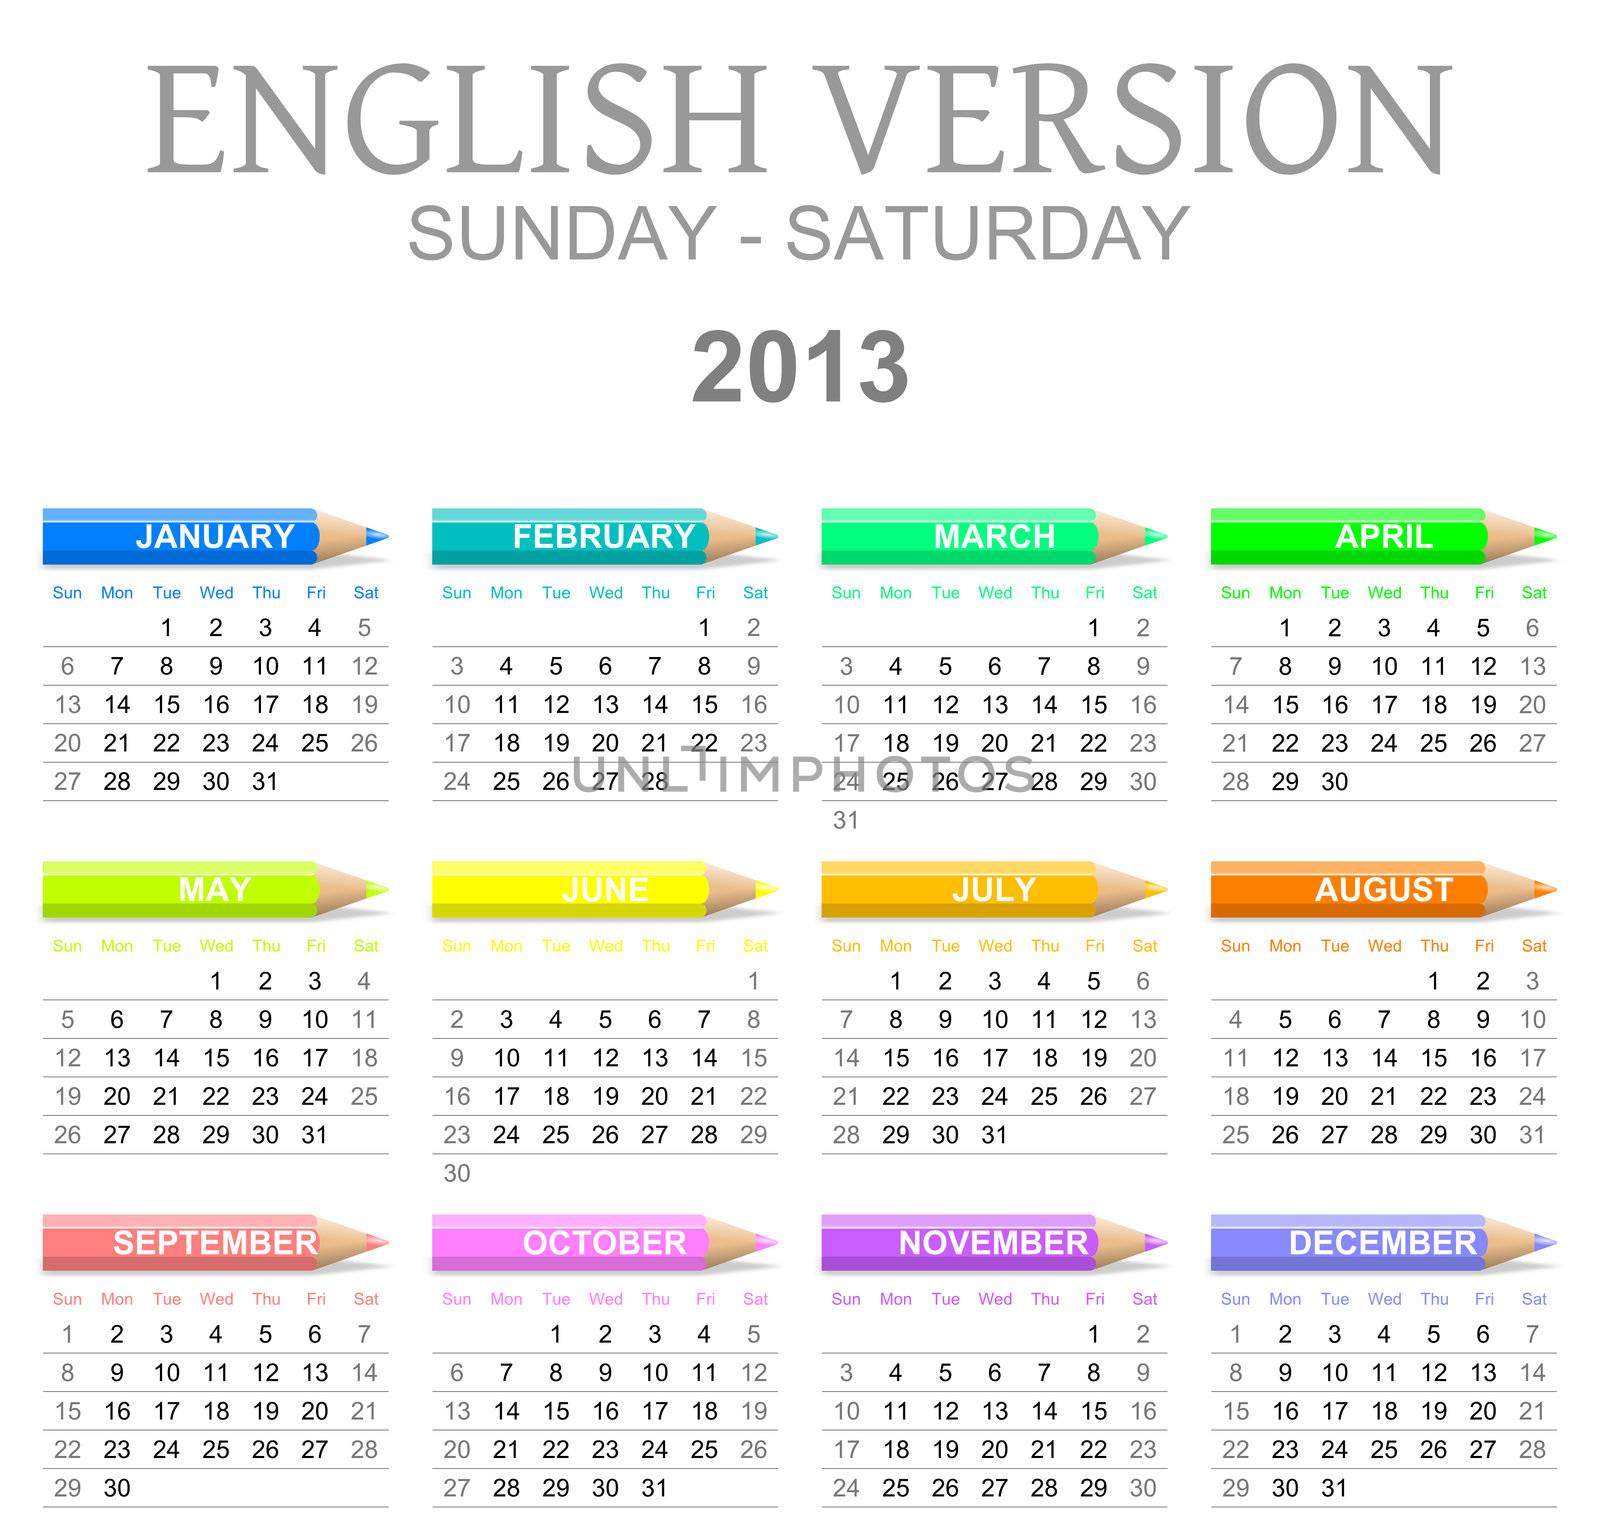 Colorful sunday to saturday 2013 calendar with crayons english version illustration